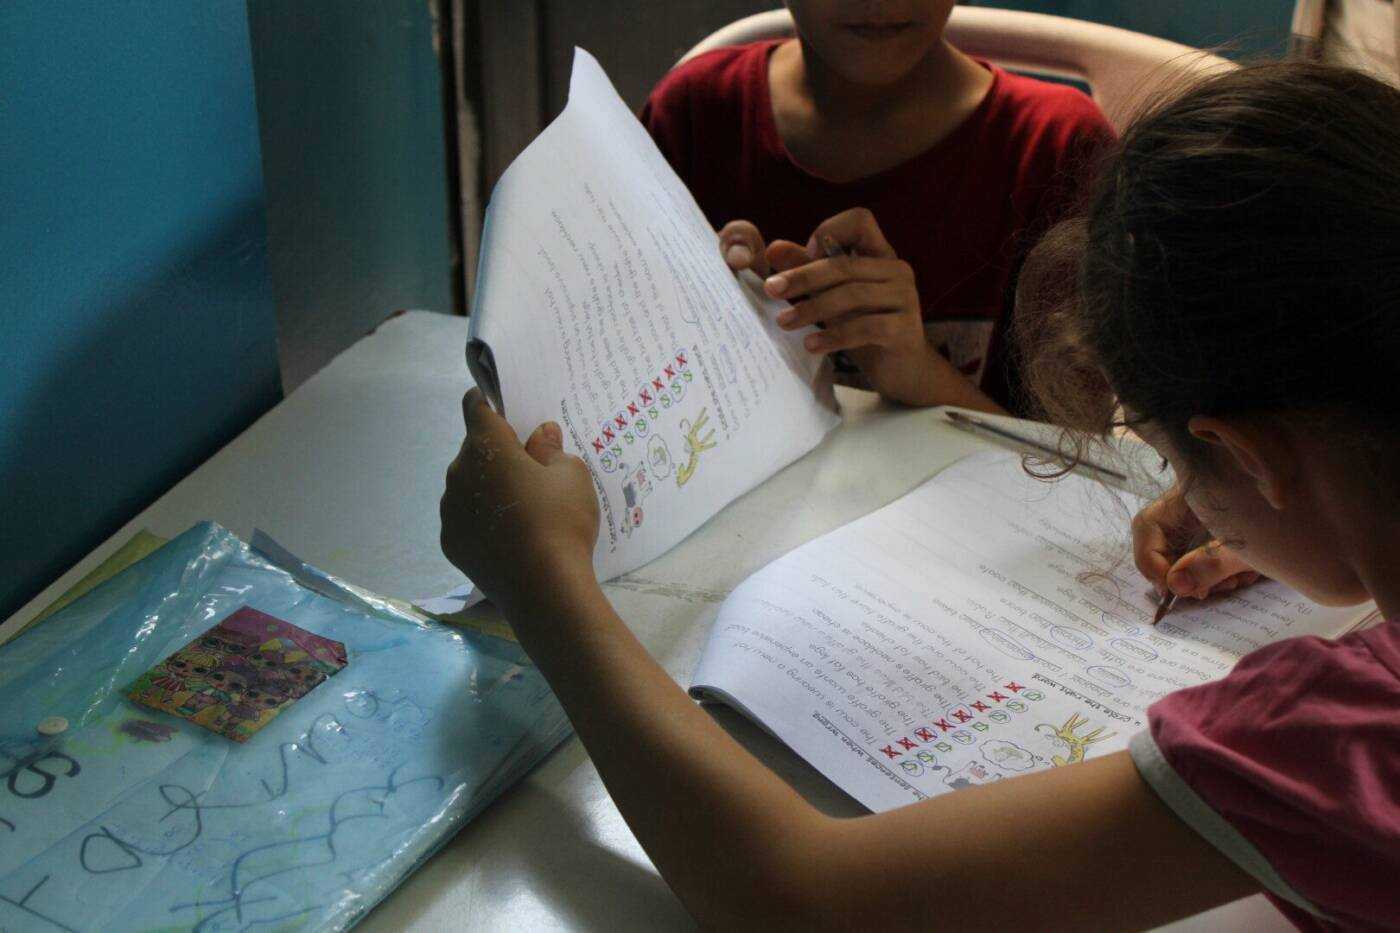 Students complete an English workbook at 26 Letters, a learning center in Beirut’s Hamra neighborhood, 04/10/2023 (Hanna Davis/Syria Direct)